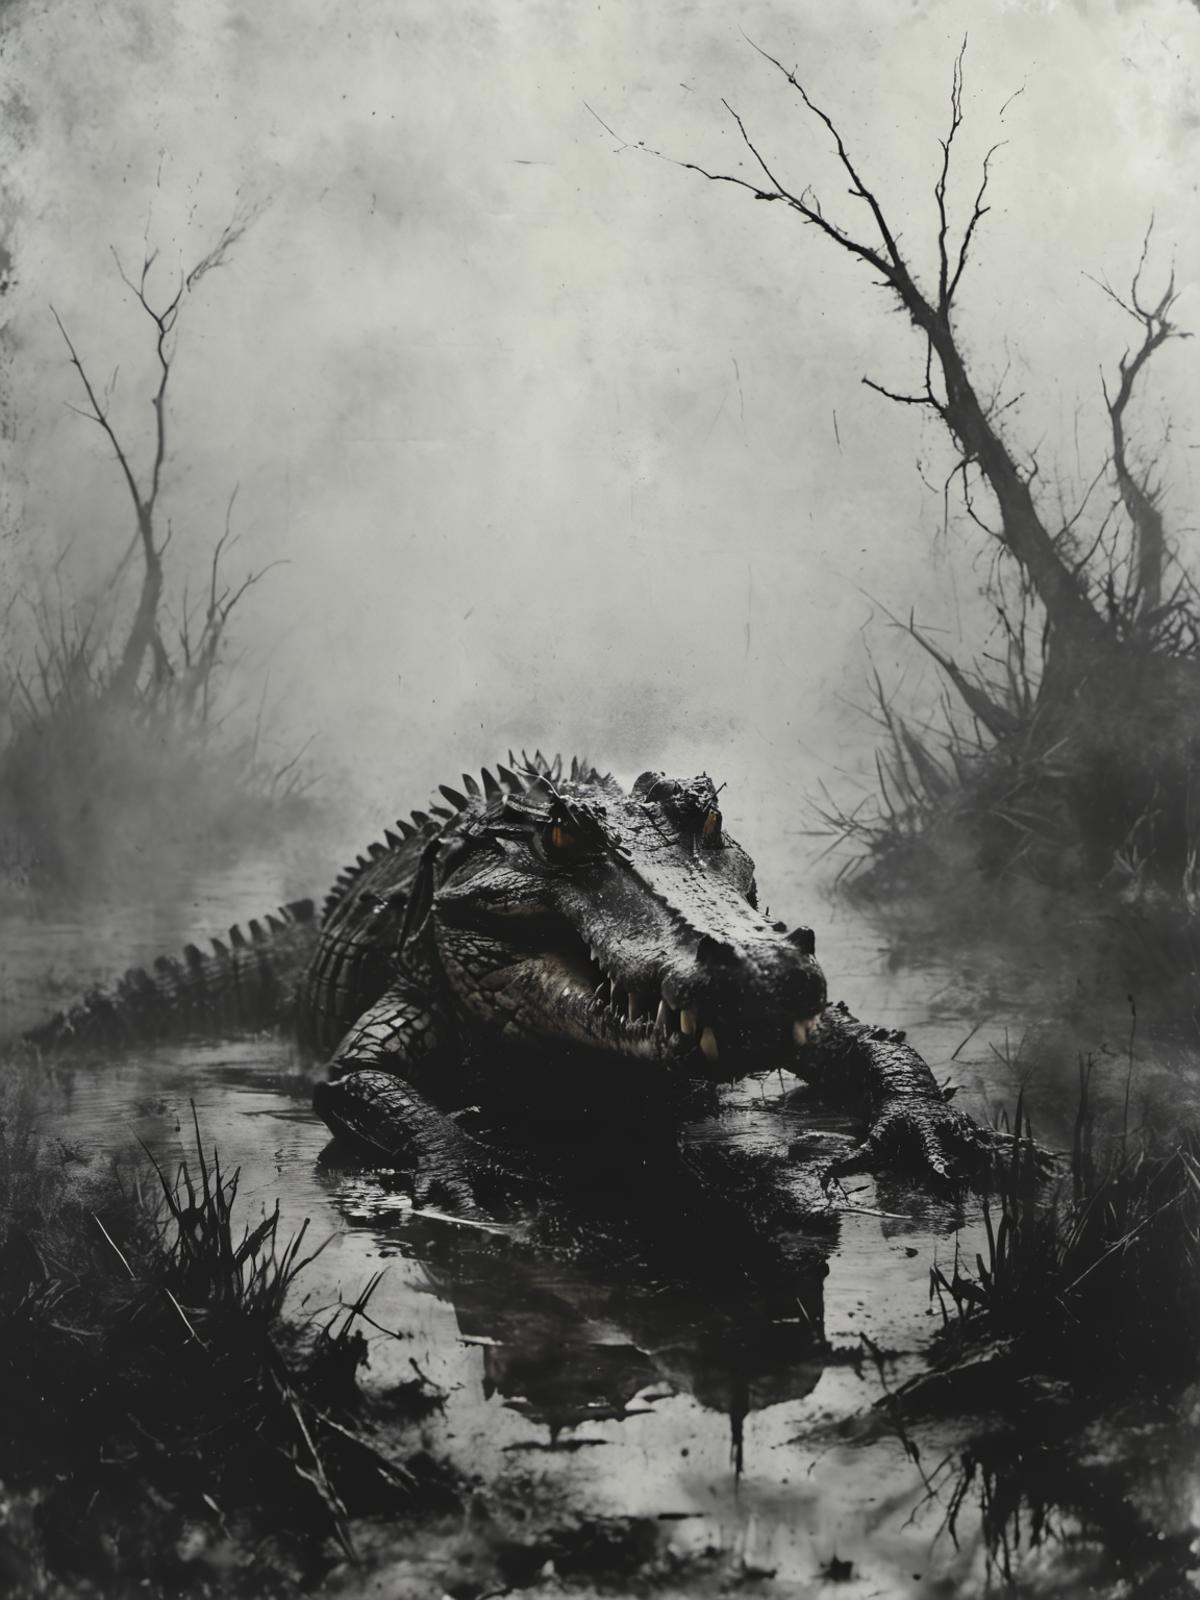 An alligator in a murky swamp with a tree in the background.